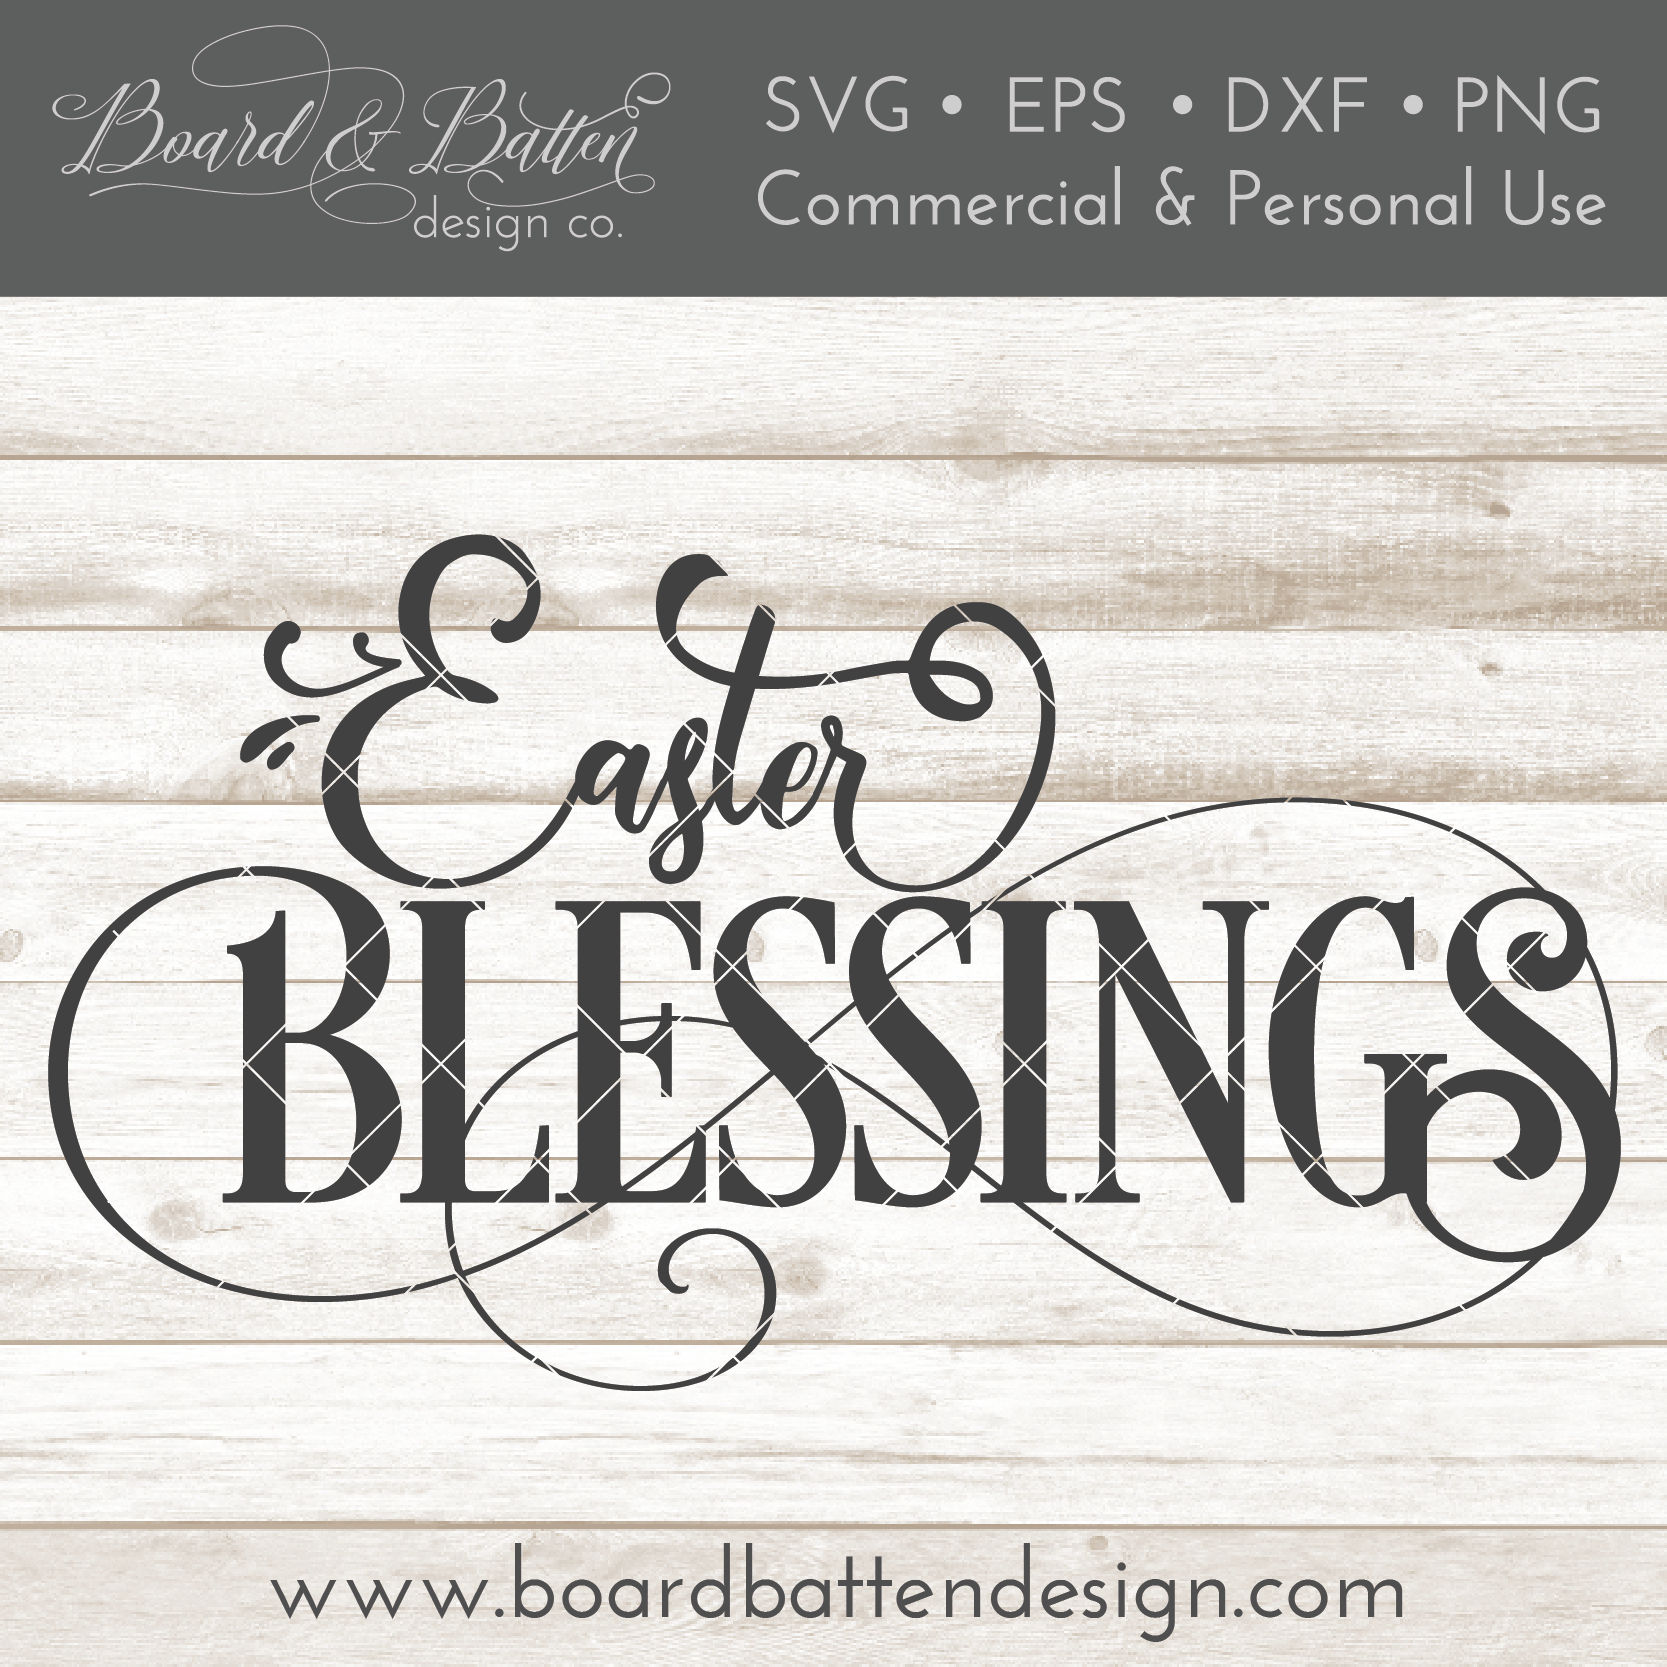 Easter Blessings SVG File - Commercial Use SVG Files for Cricut & Silhouette